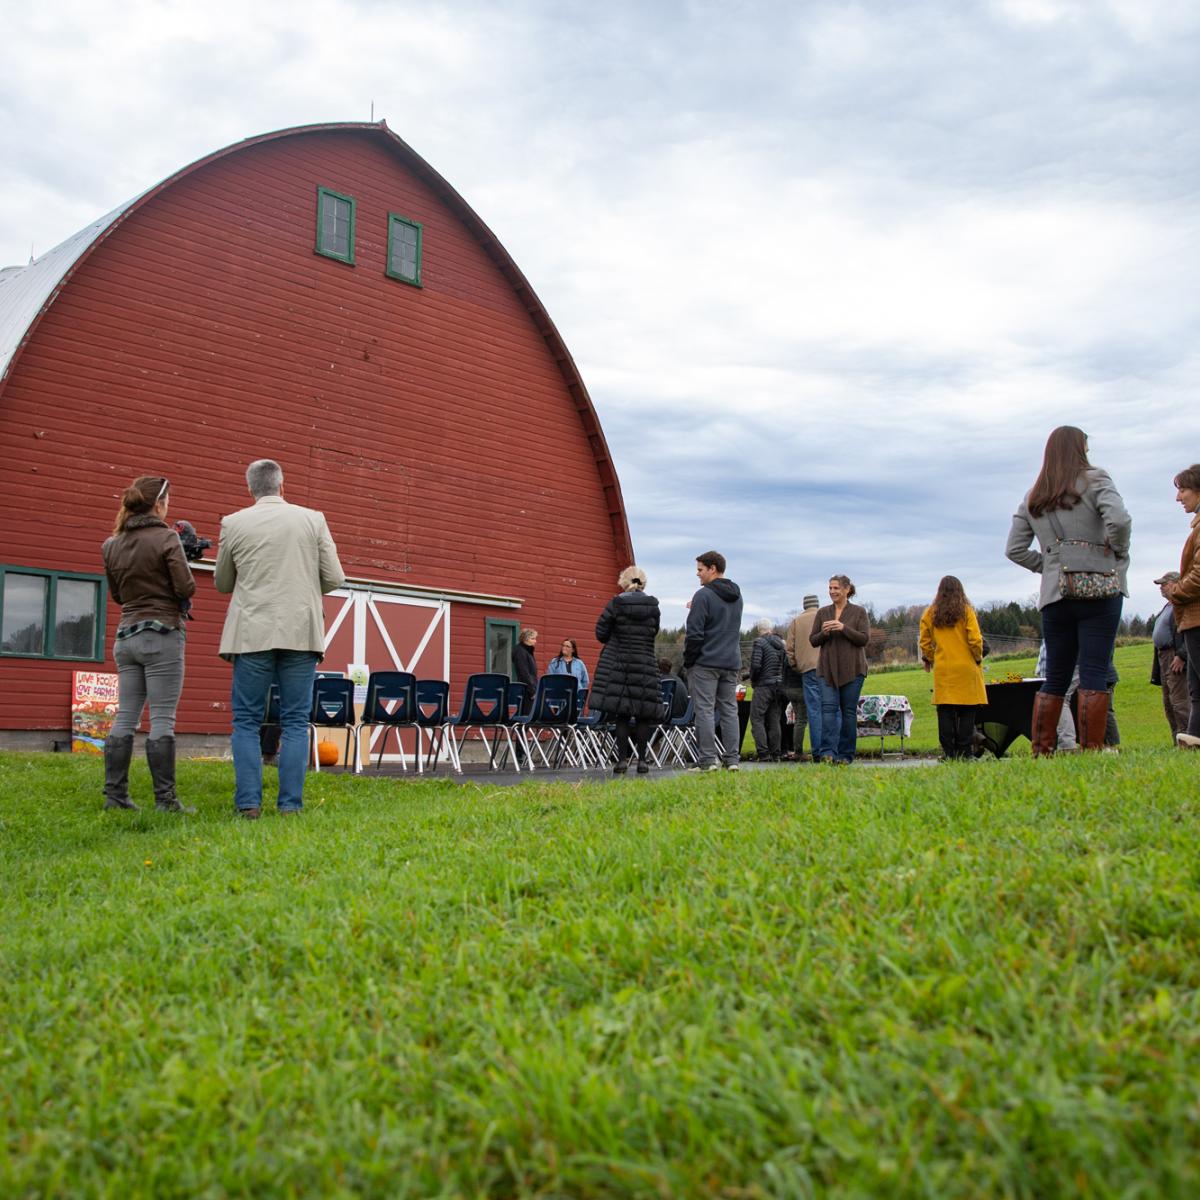 A red barn on school grounds, people gathered for a farm to school event